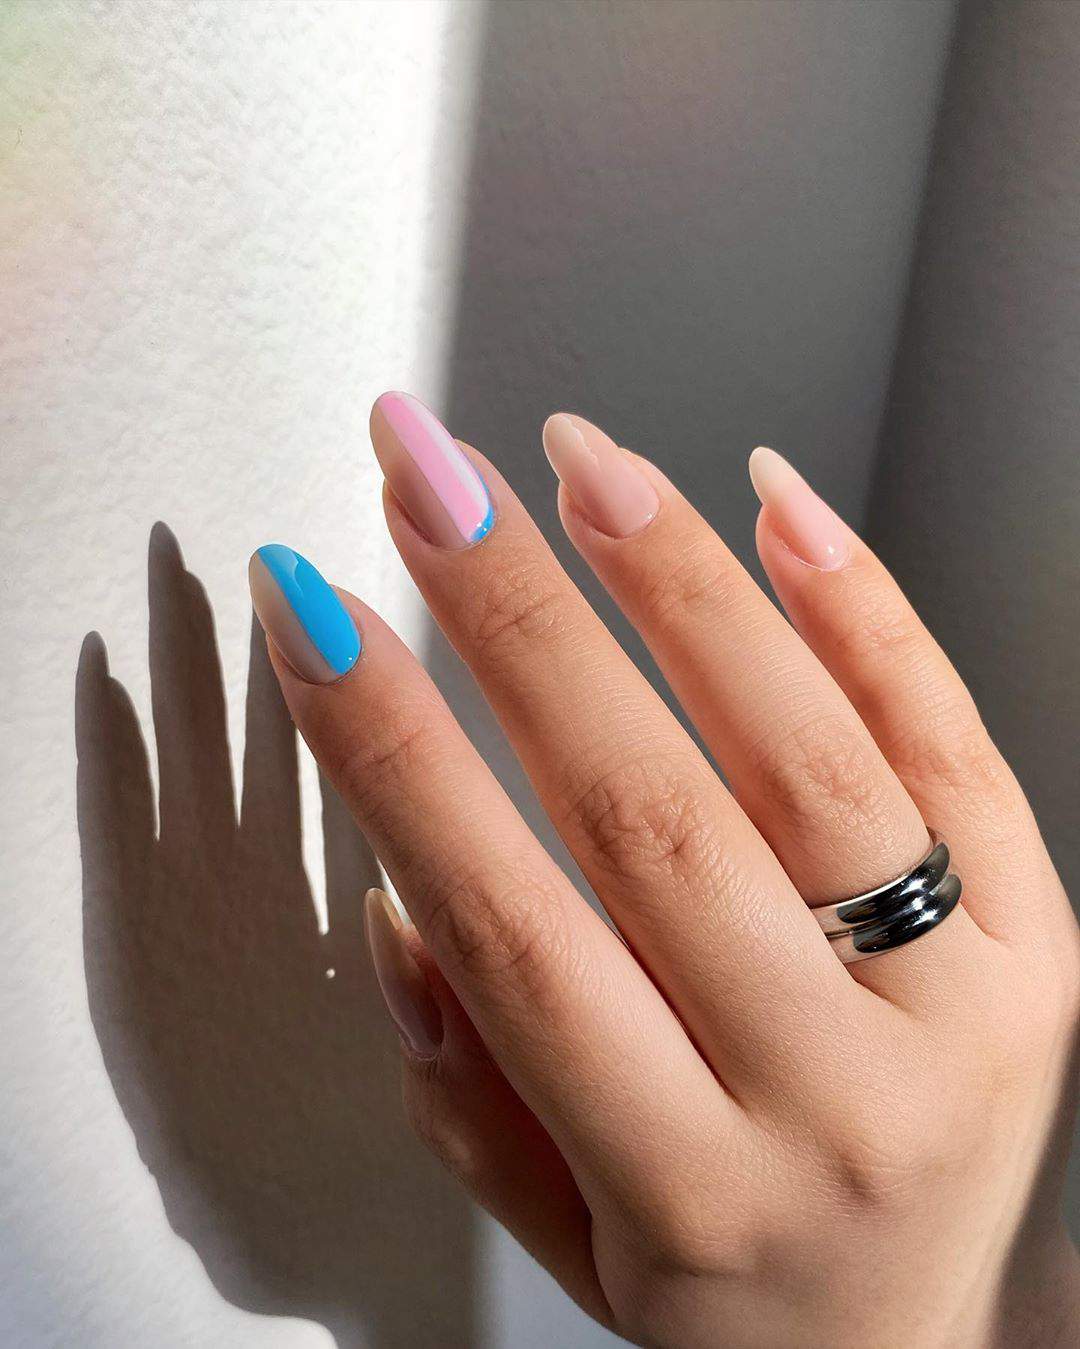 50 Best Nail Designs Trends To Try Out In 2022 images 20